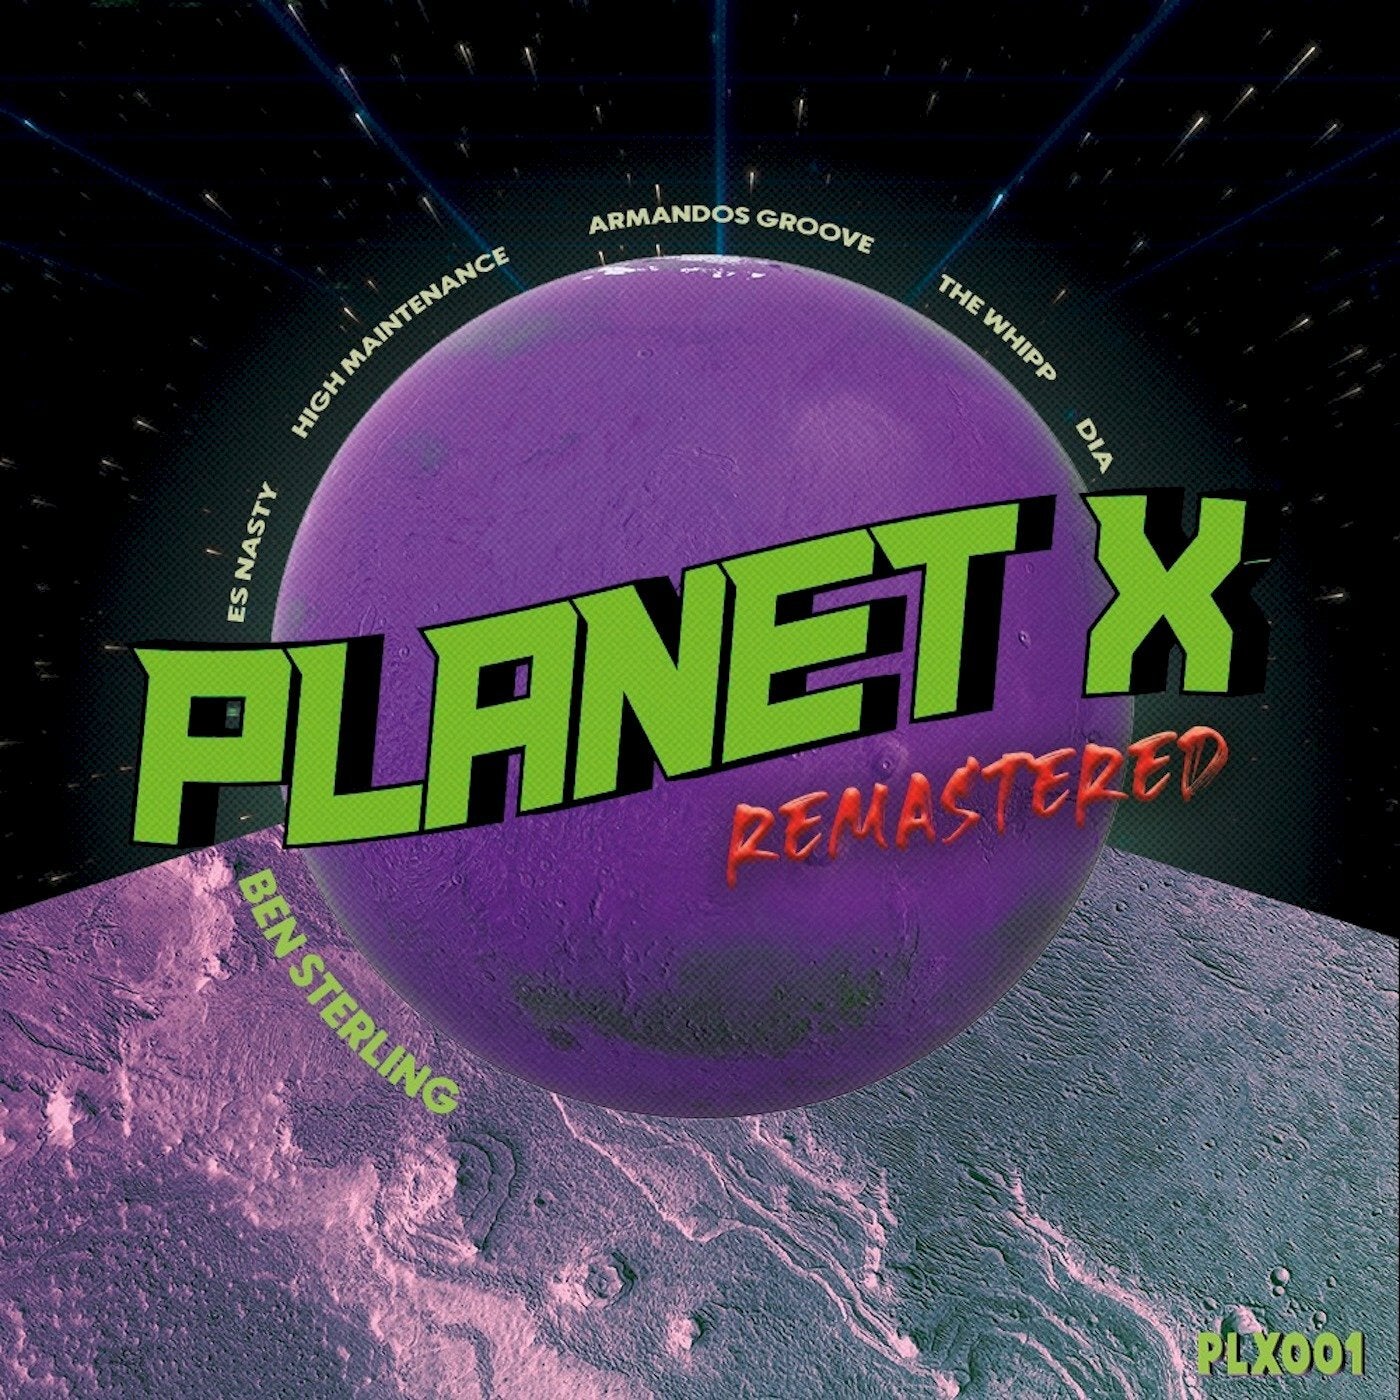 Download Planet X Remastered on Electrobuzz